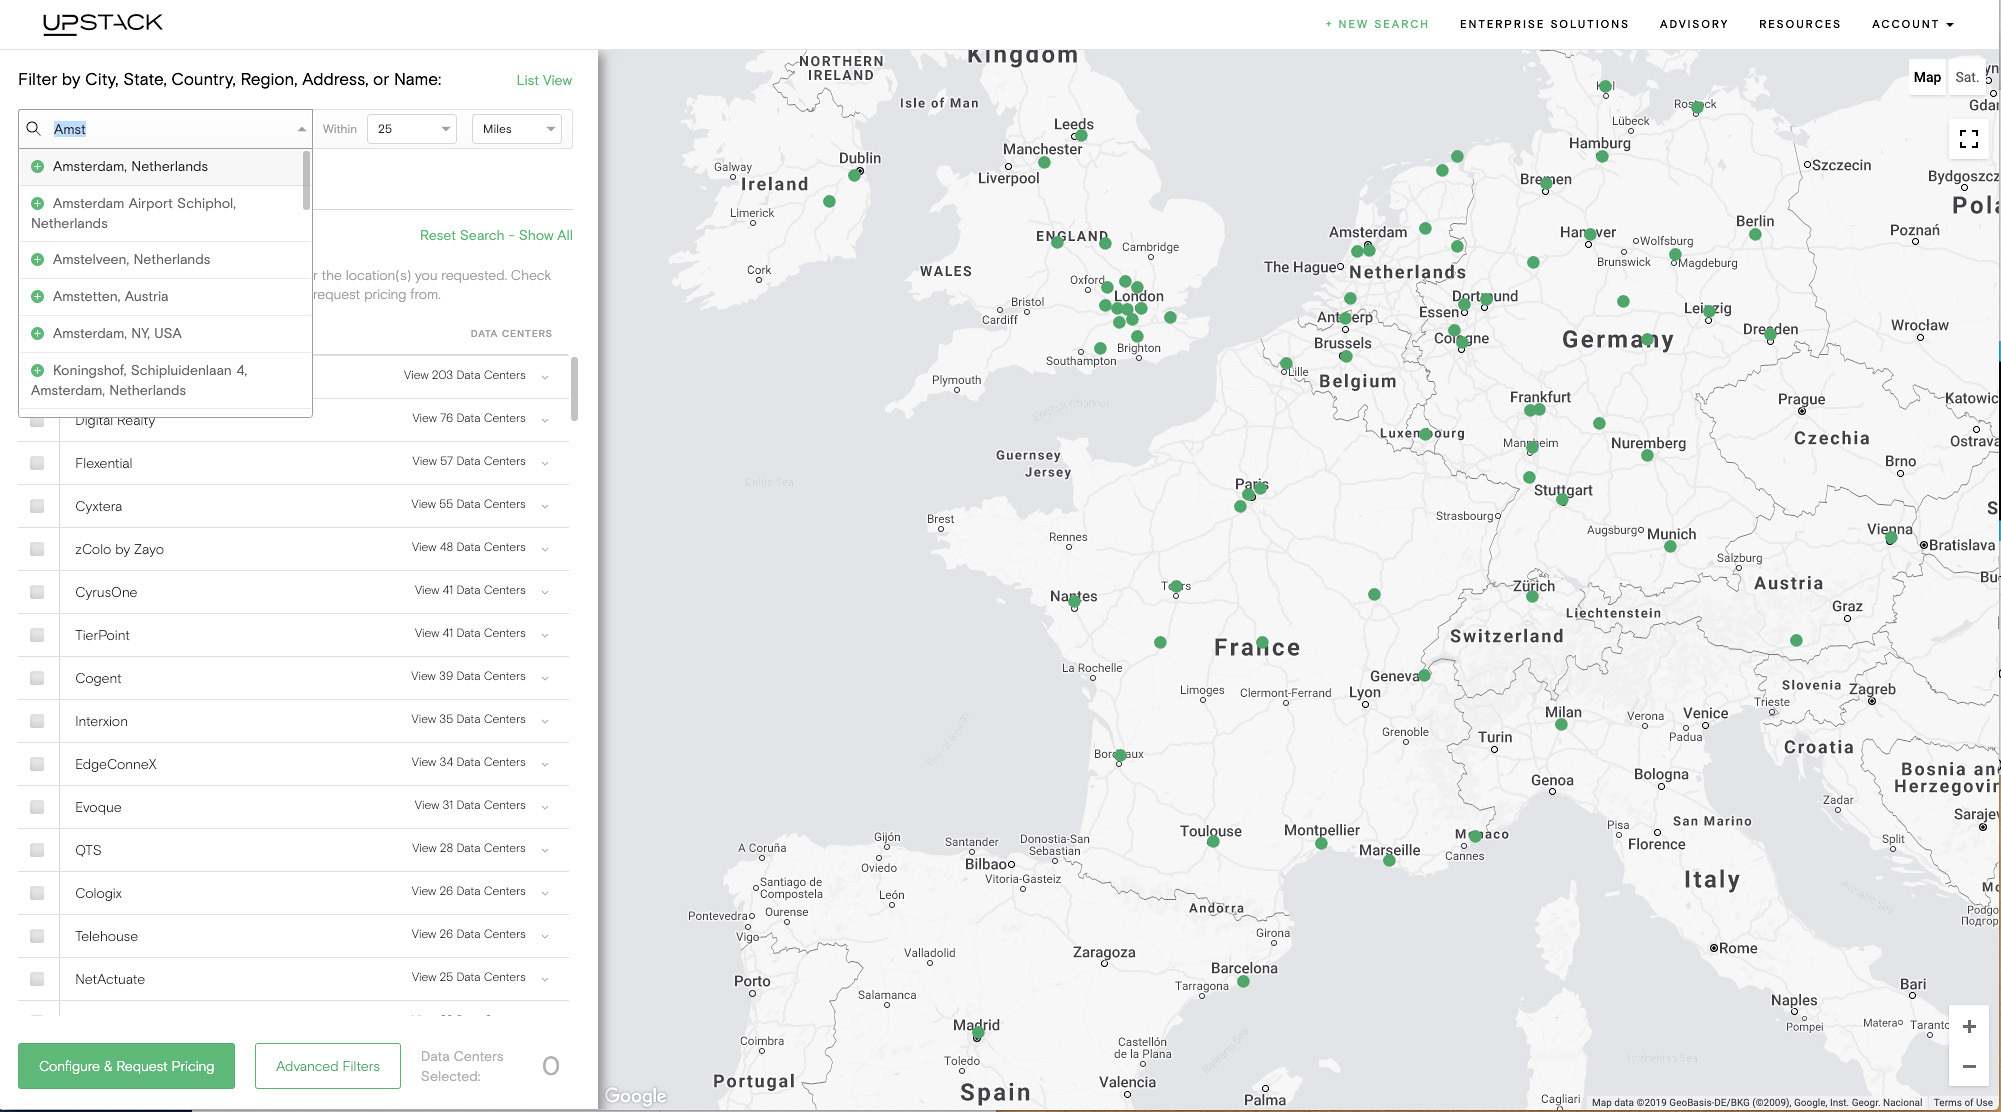 UpStack data center search map